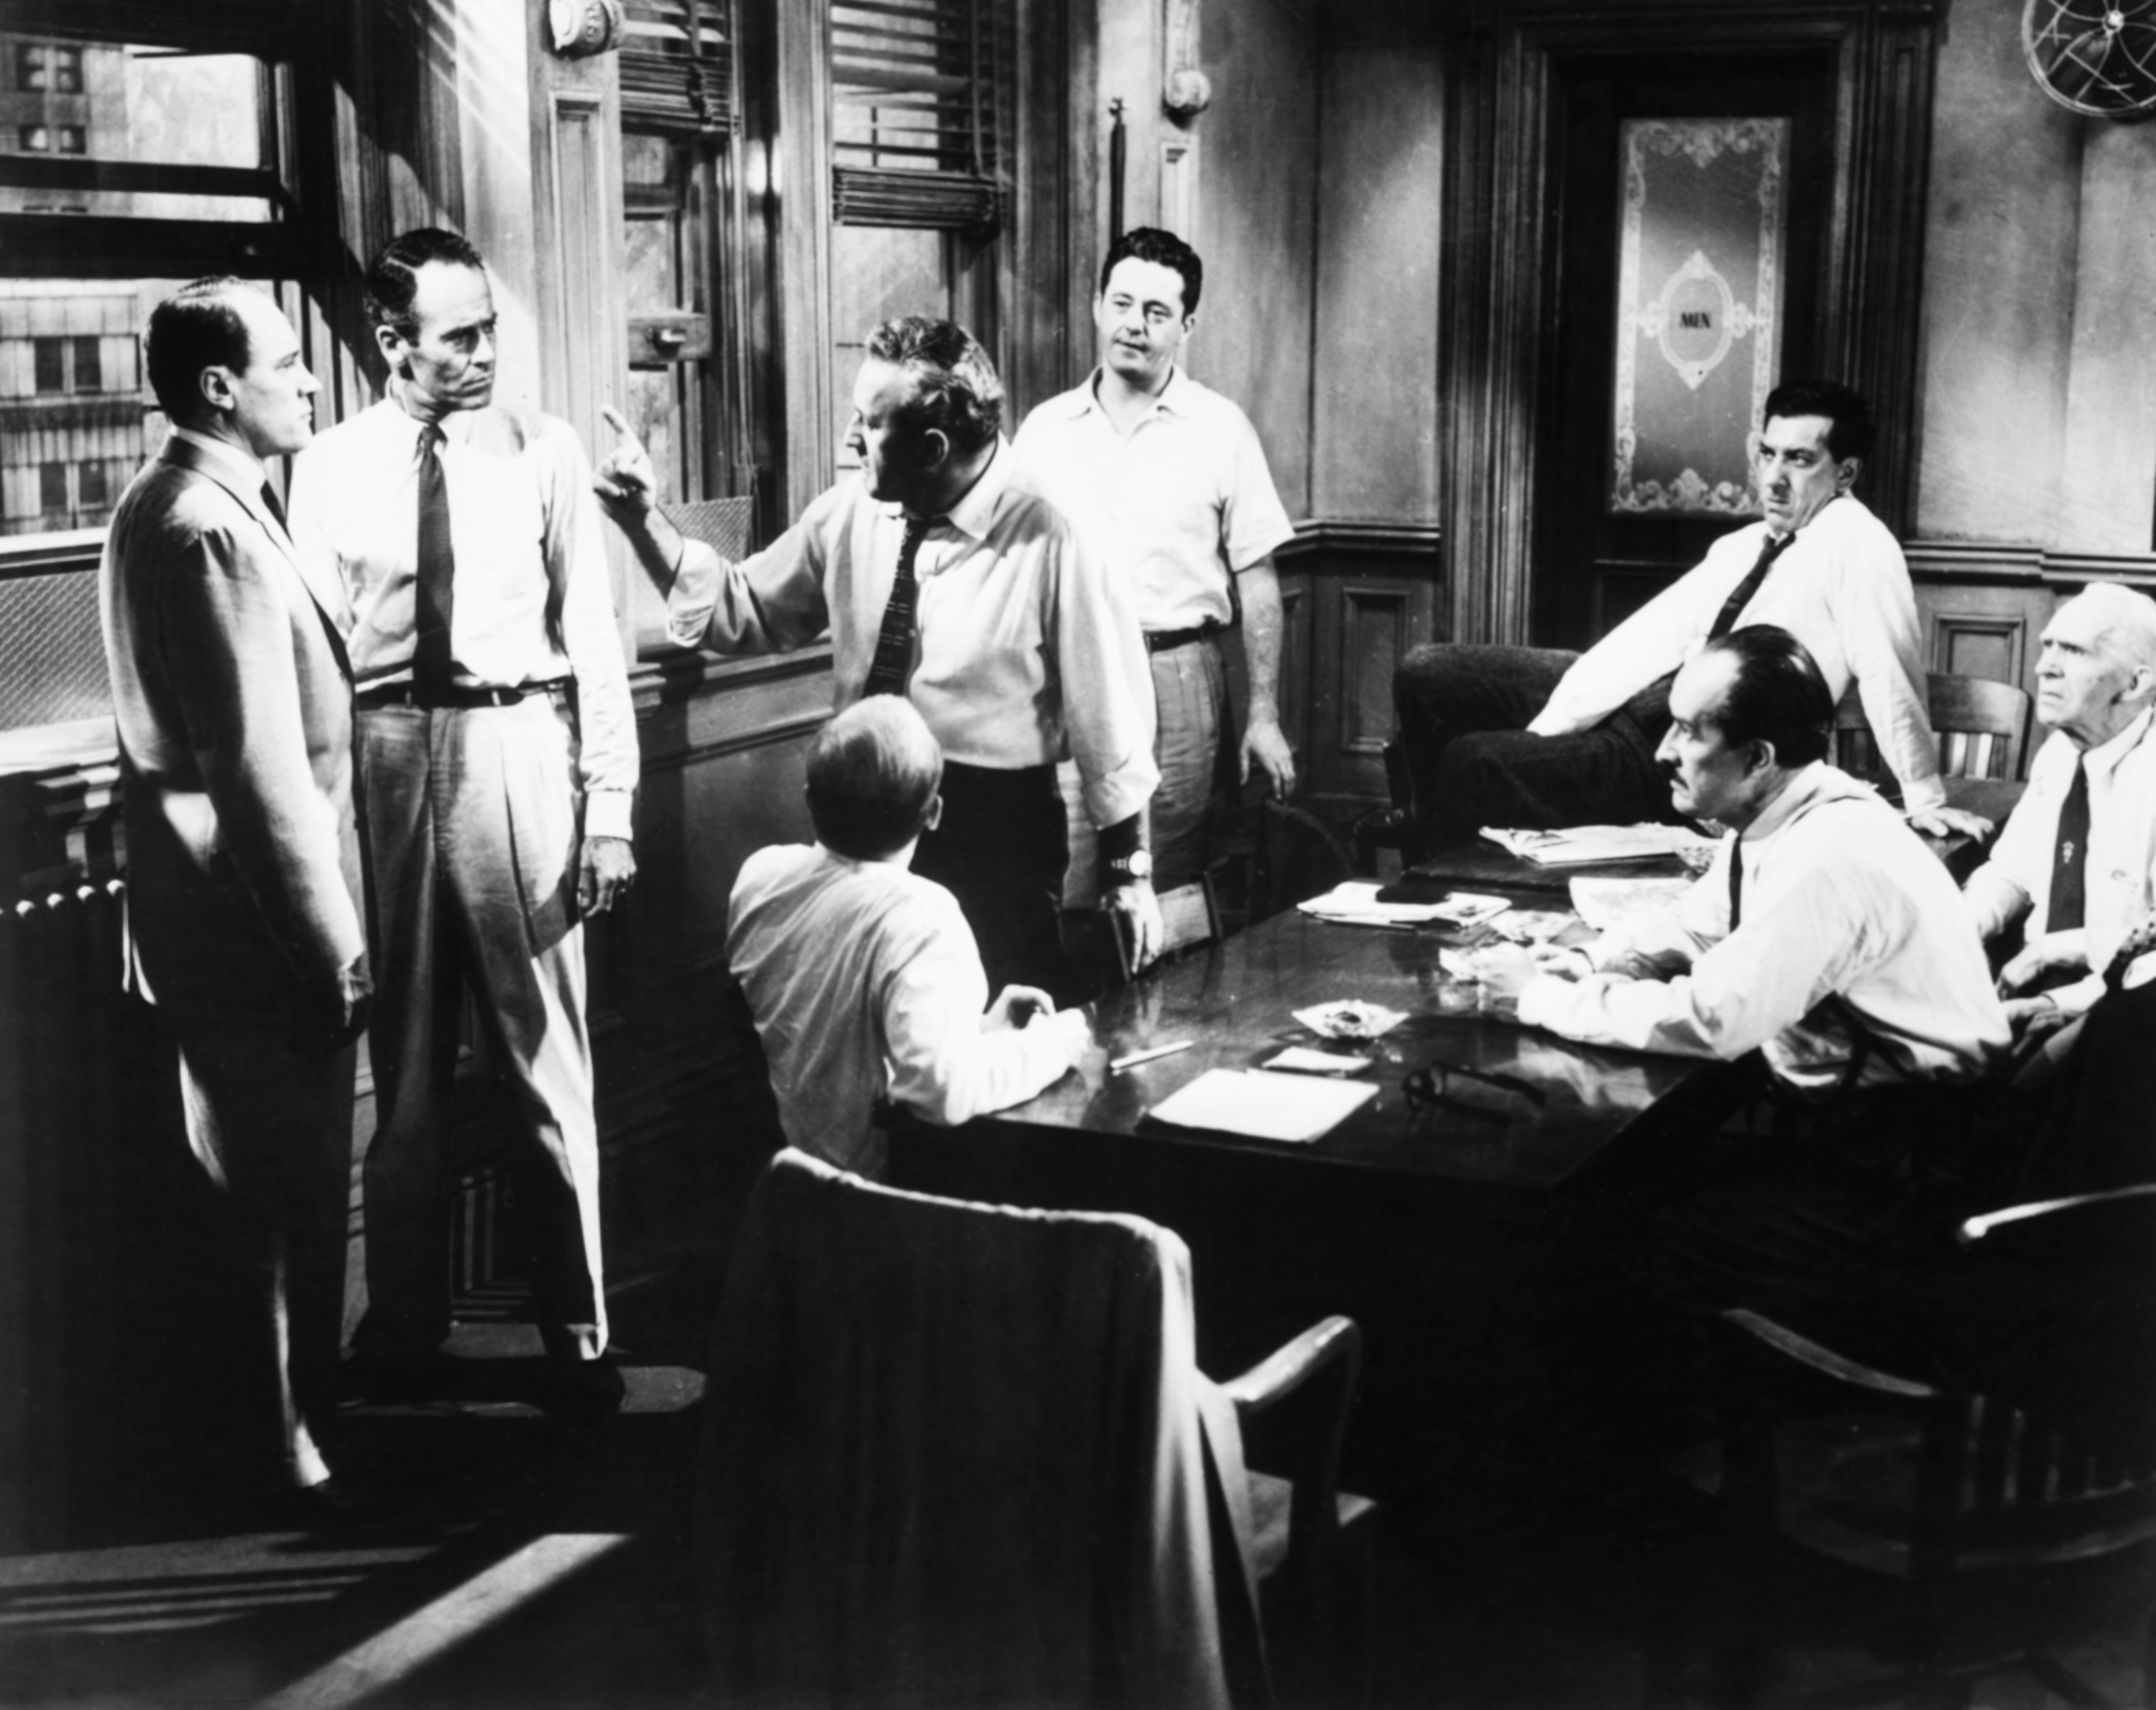 A group of men argue in a small conference room